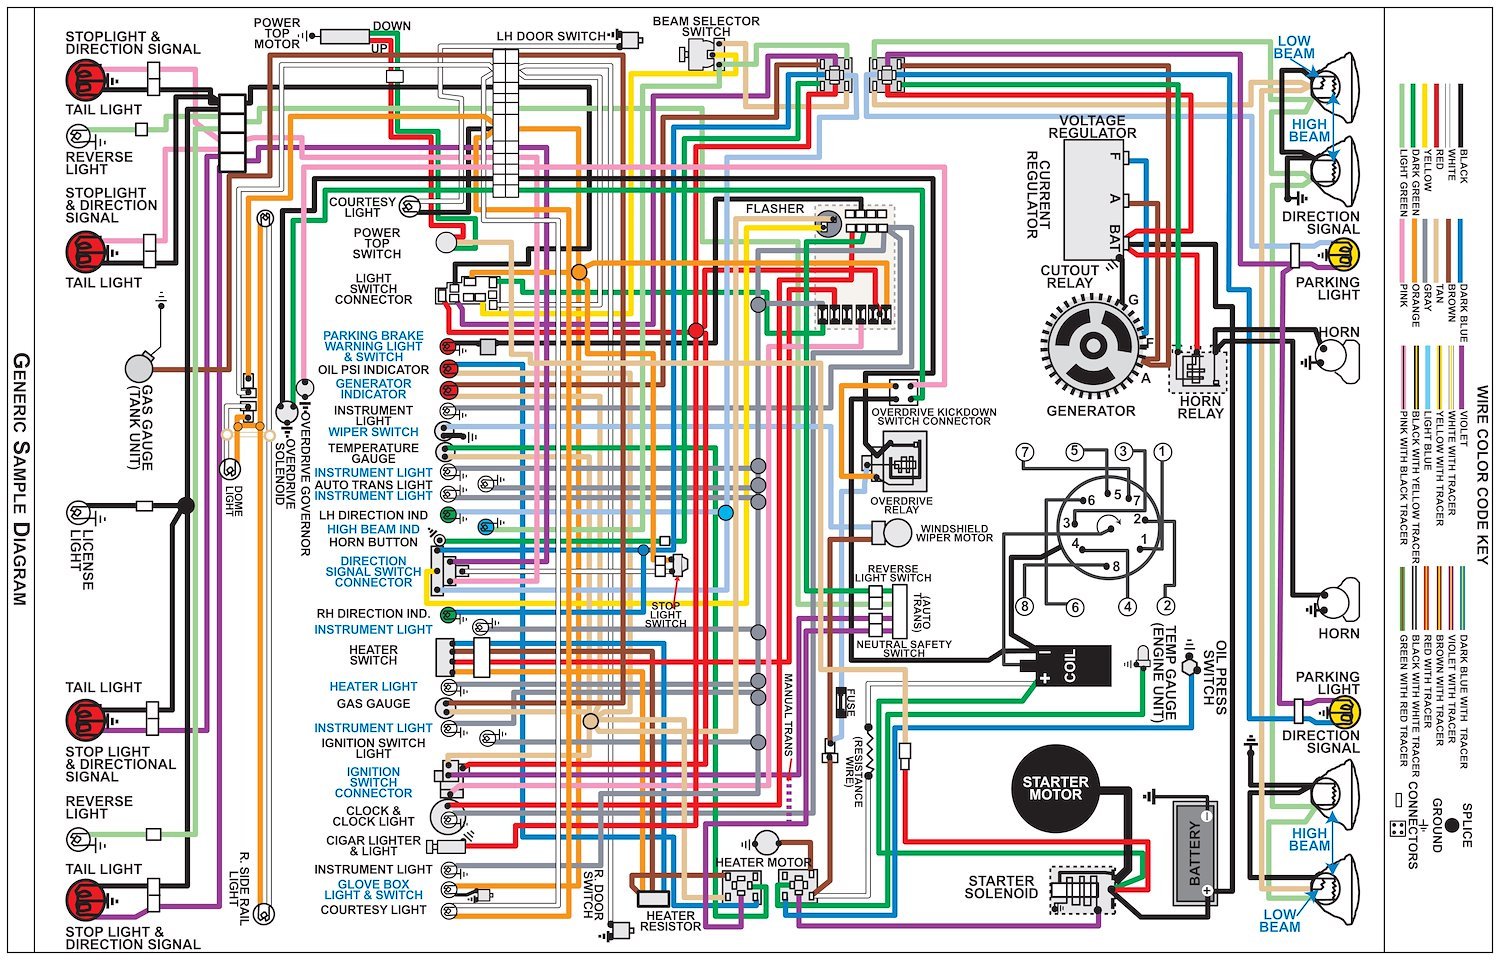 Wiring Diagram for 1966 Ford Fairlane, 11 in x 17 in., Laminated